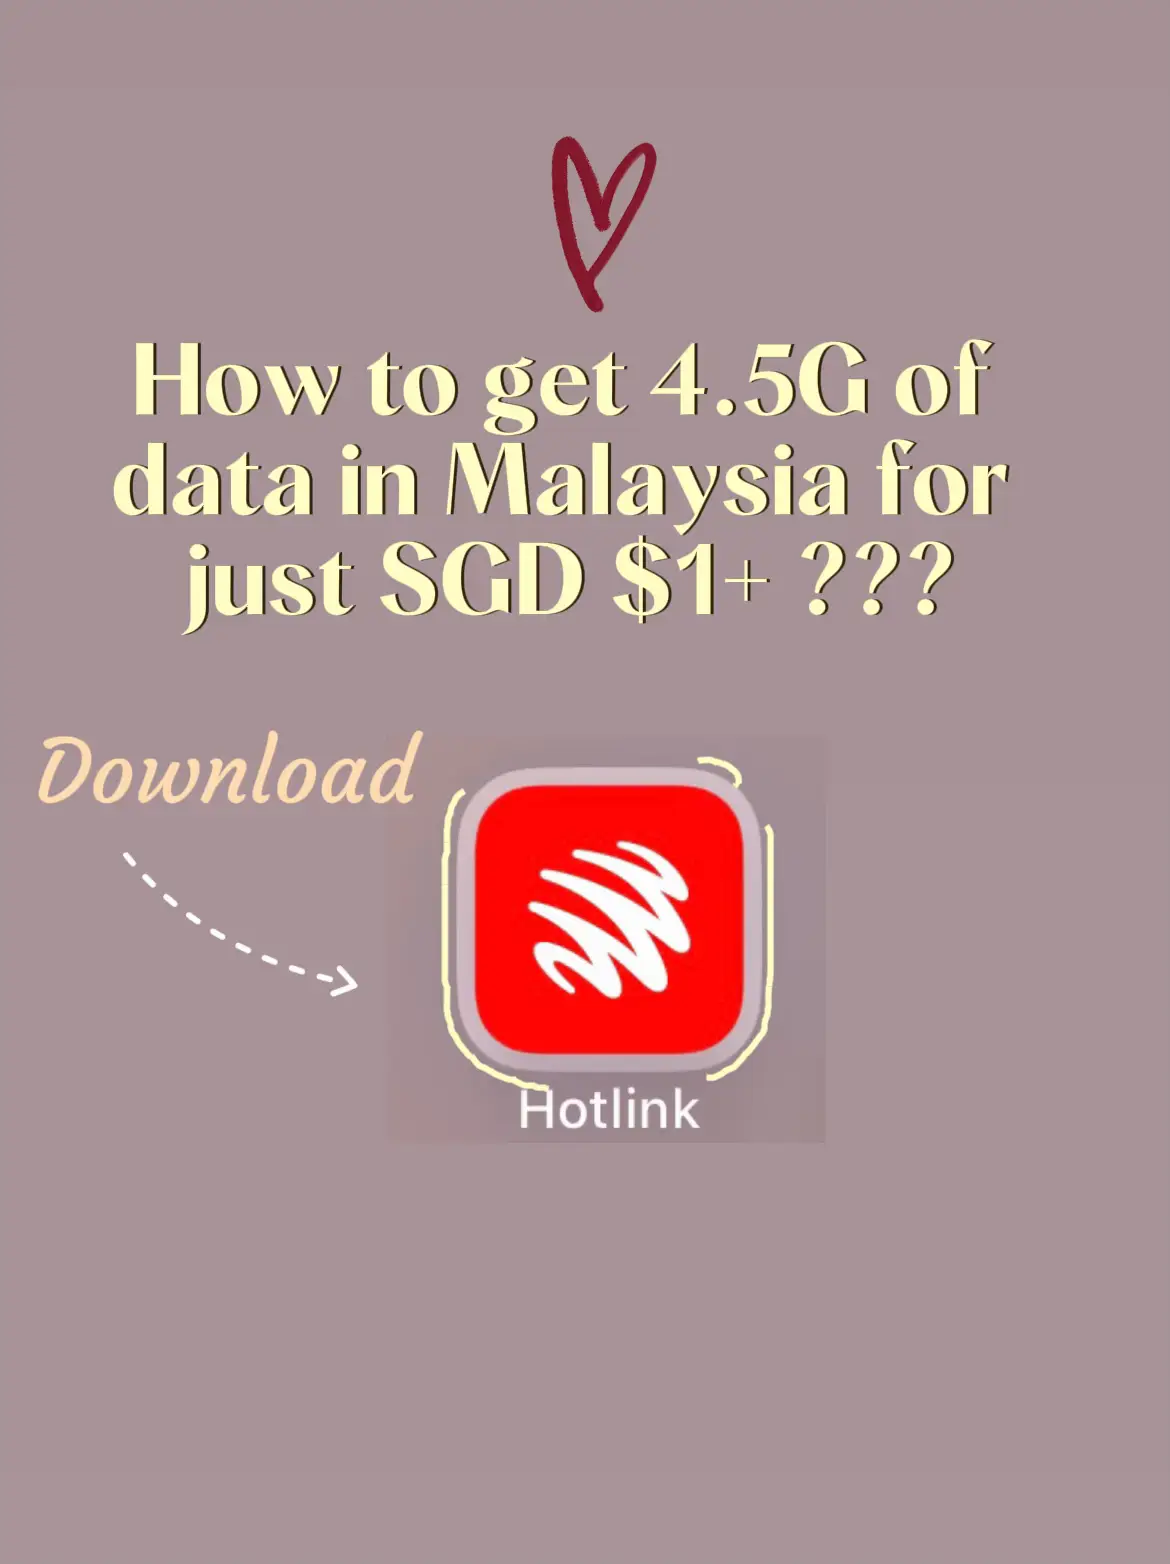 How to get 4.5G data plan in Malaysia for SGD$1+++'s images